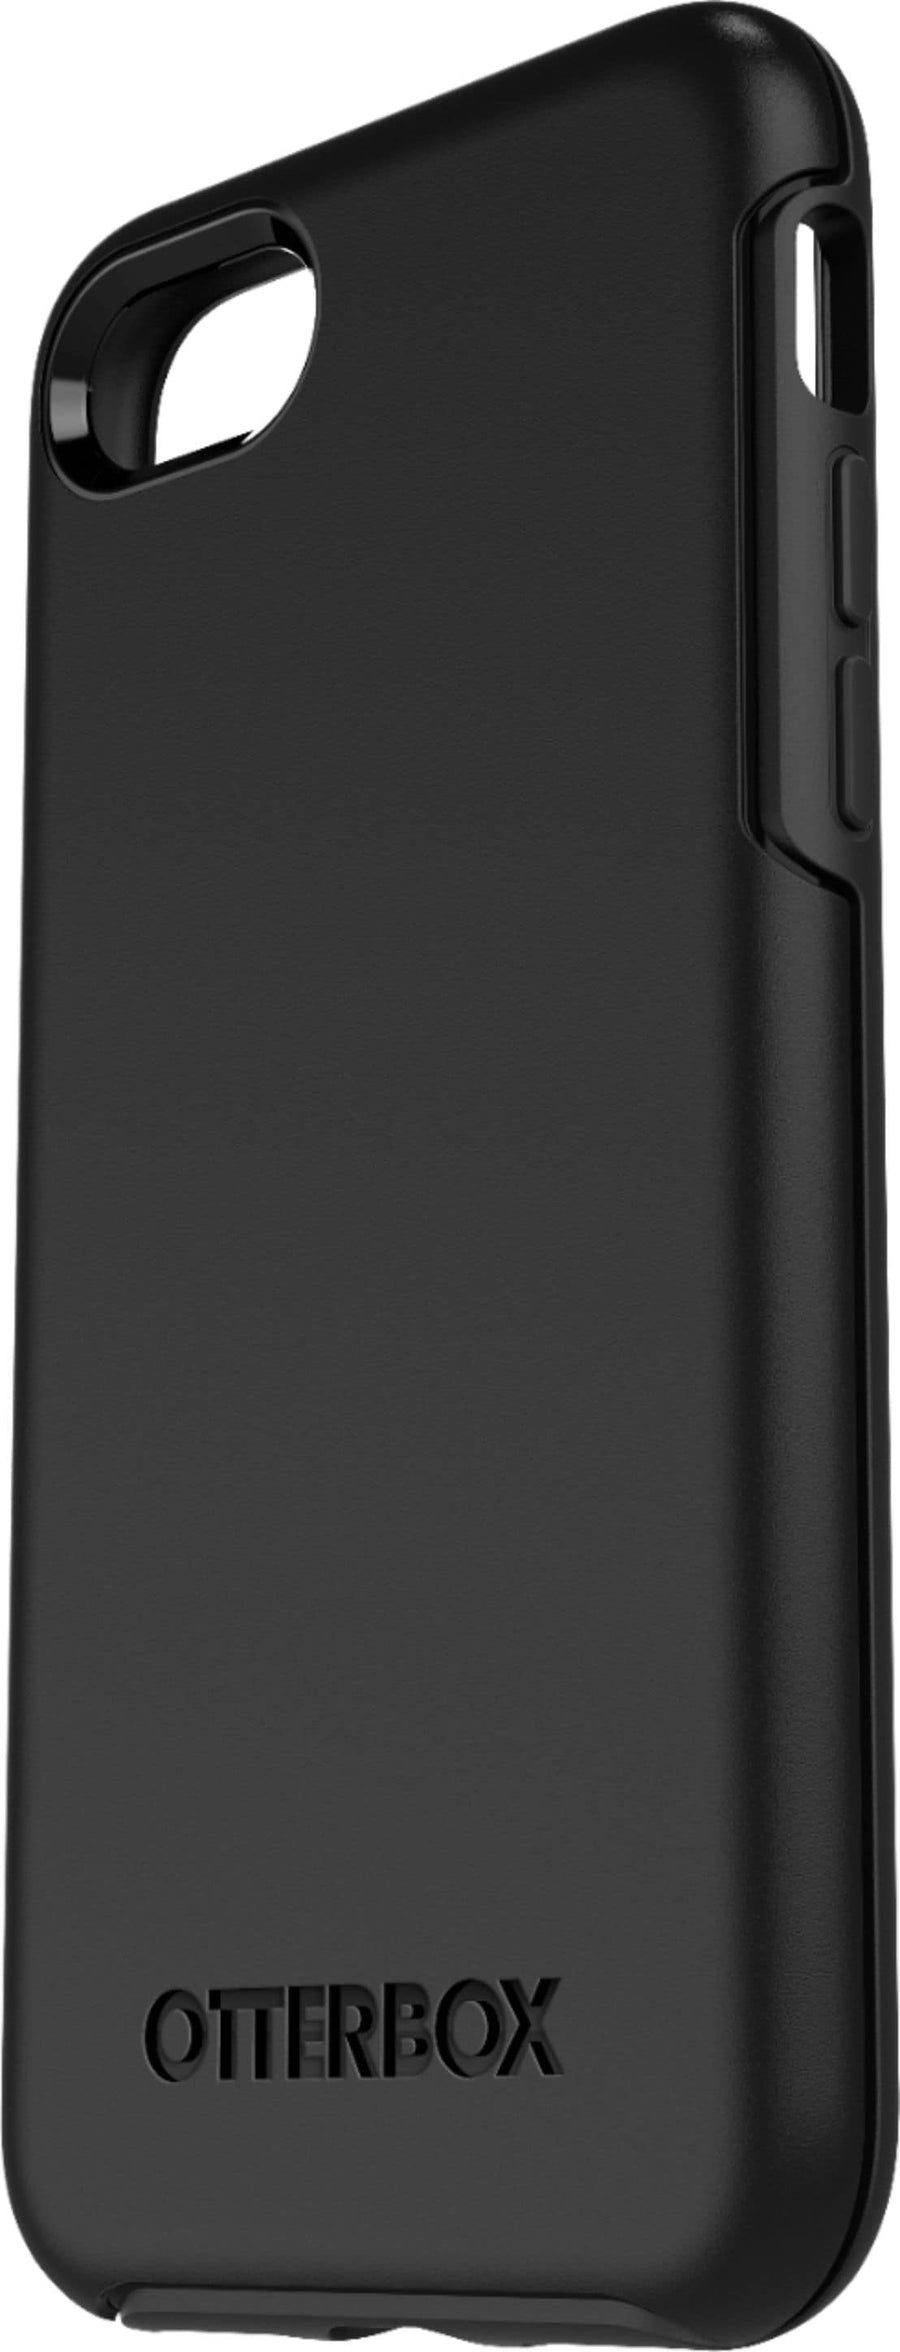 OtterBox - Symmetry Series Hard Shell Case for Apple iPhone 7, 8 and SE (2nd generation) - Black_0